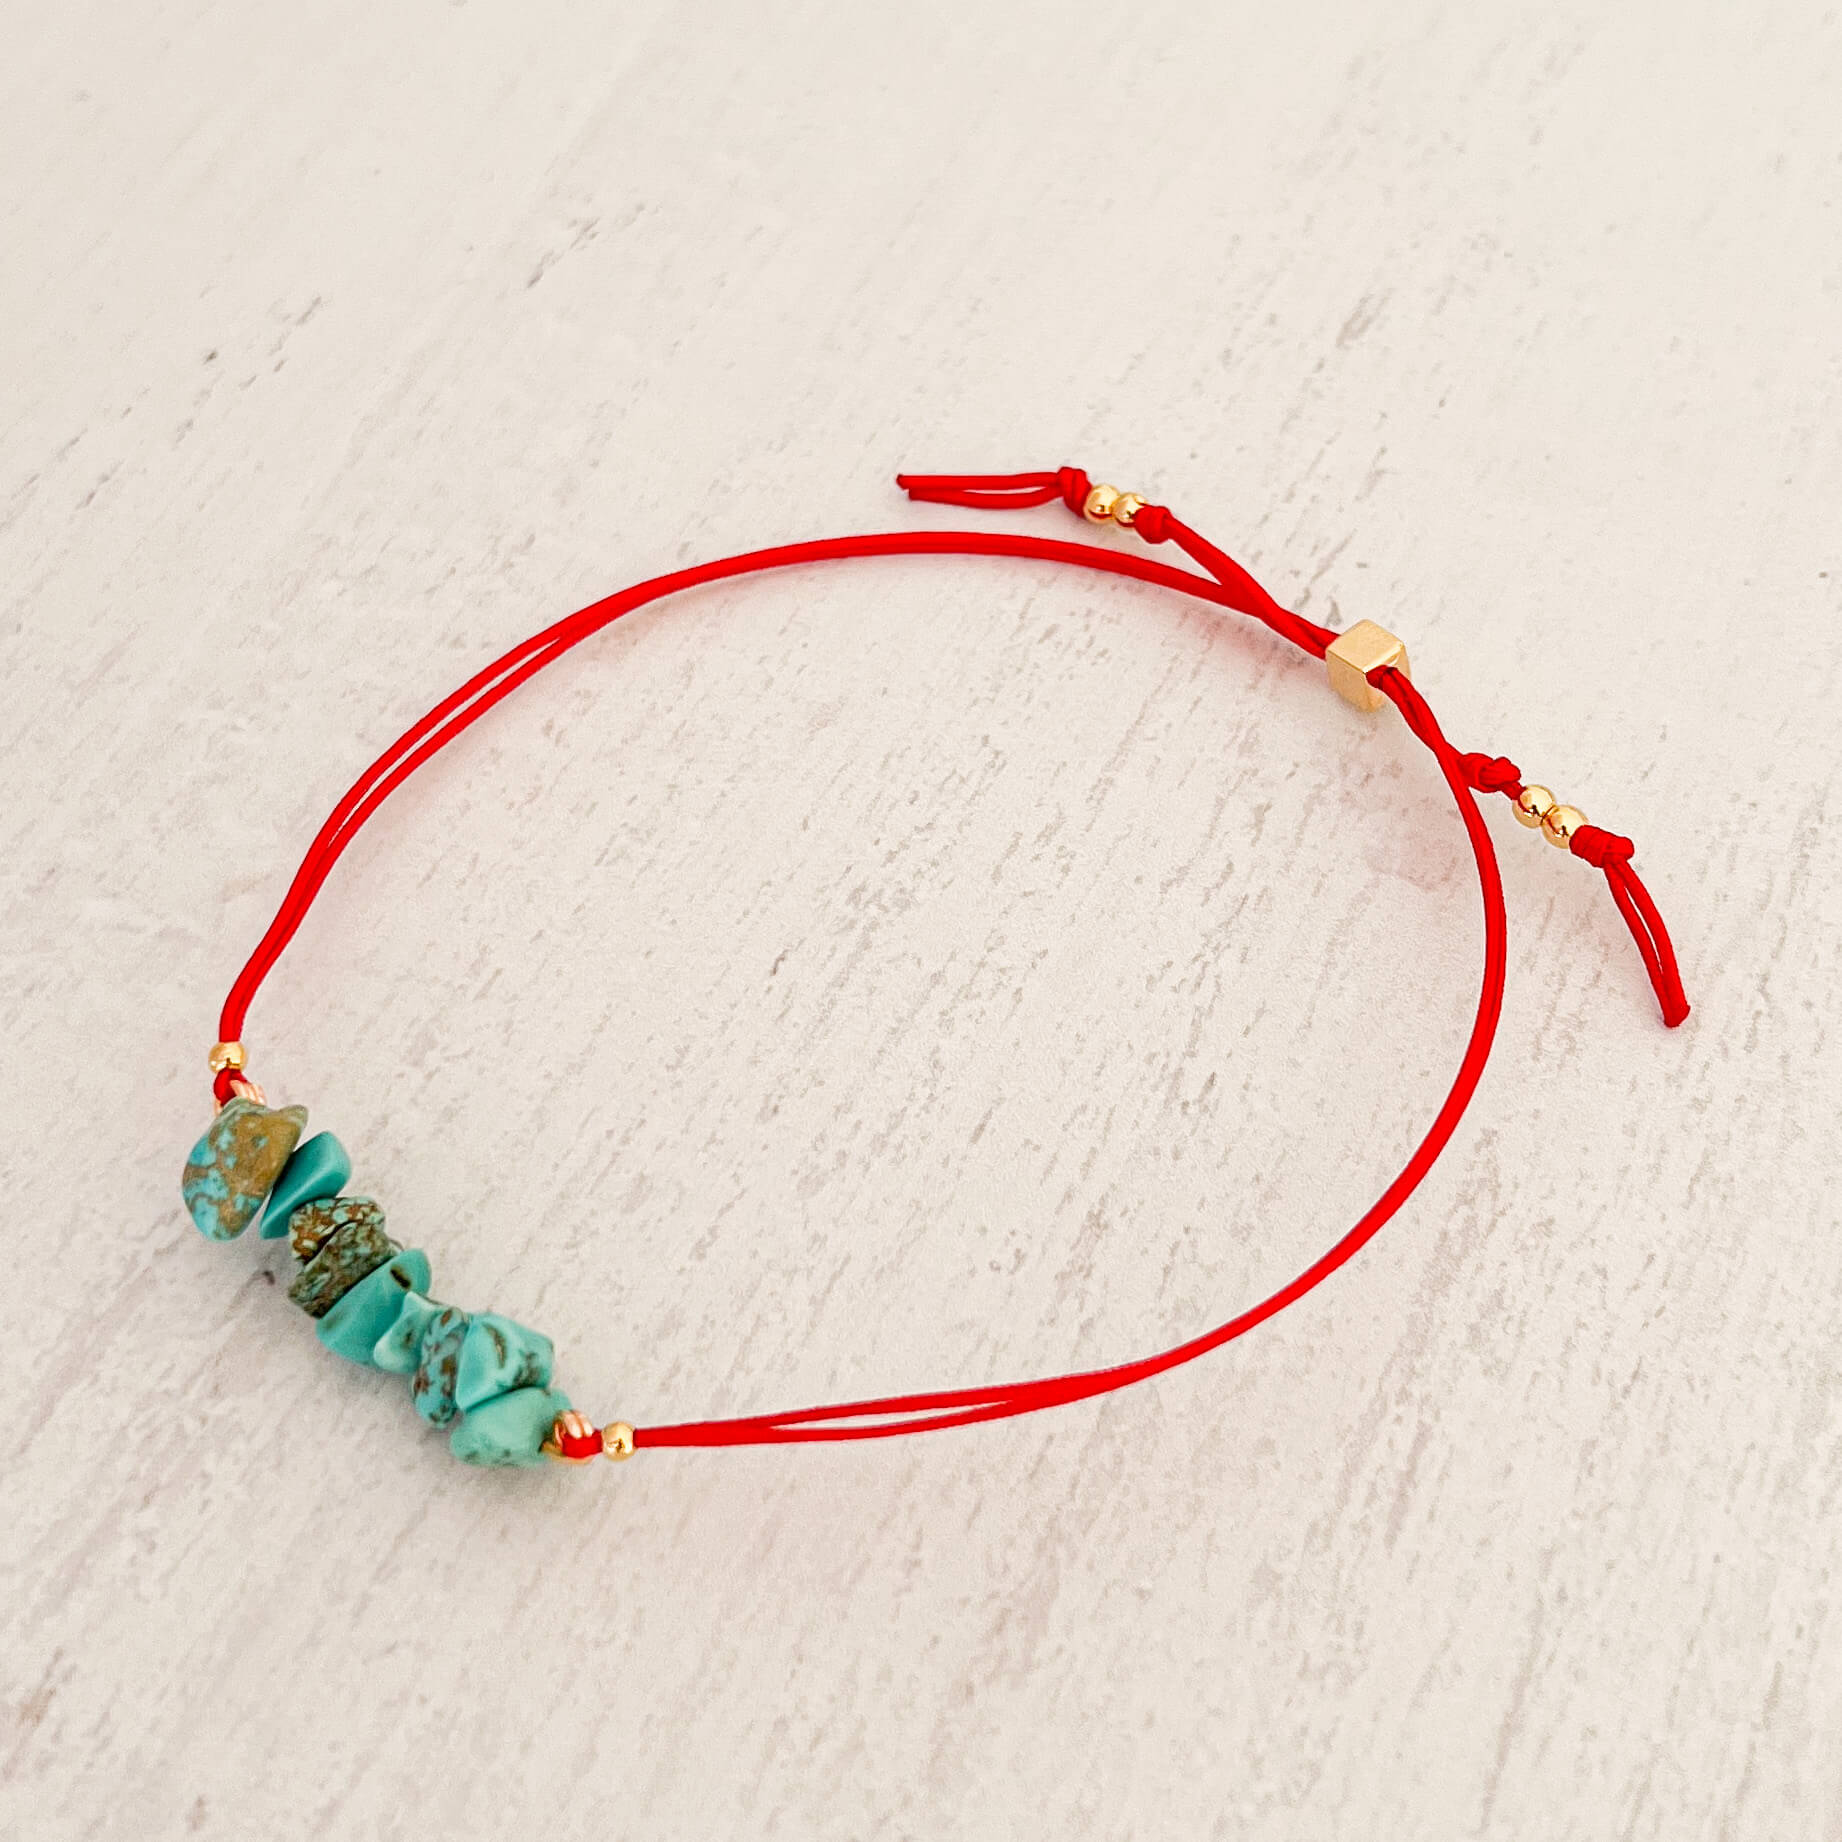 Turquoise Natural Stone Bracelet with Red Yarn